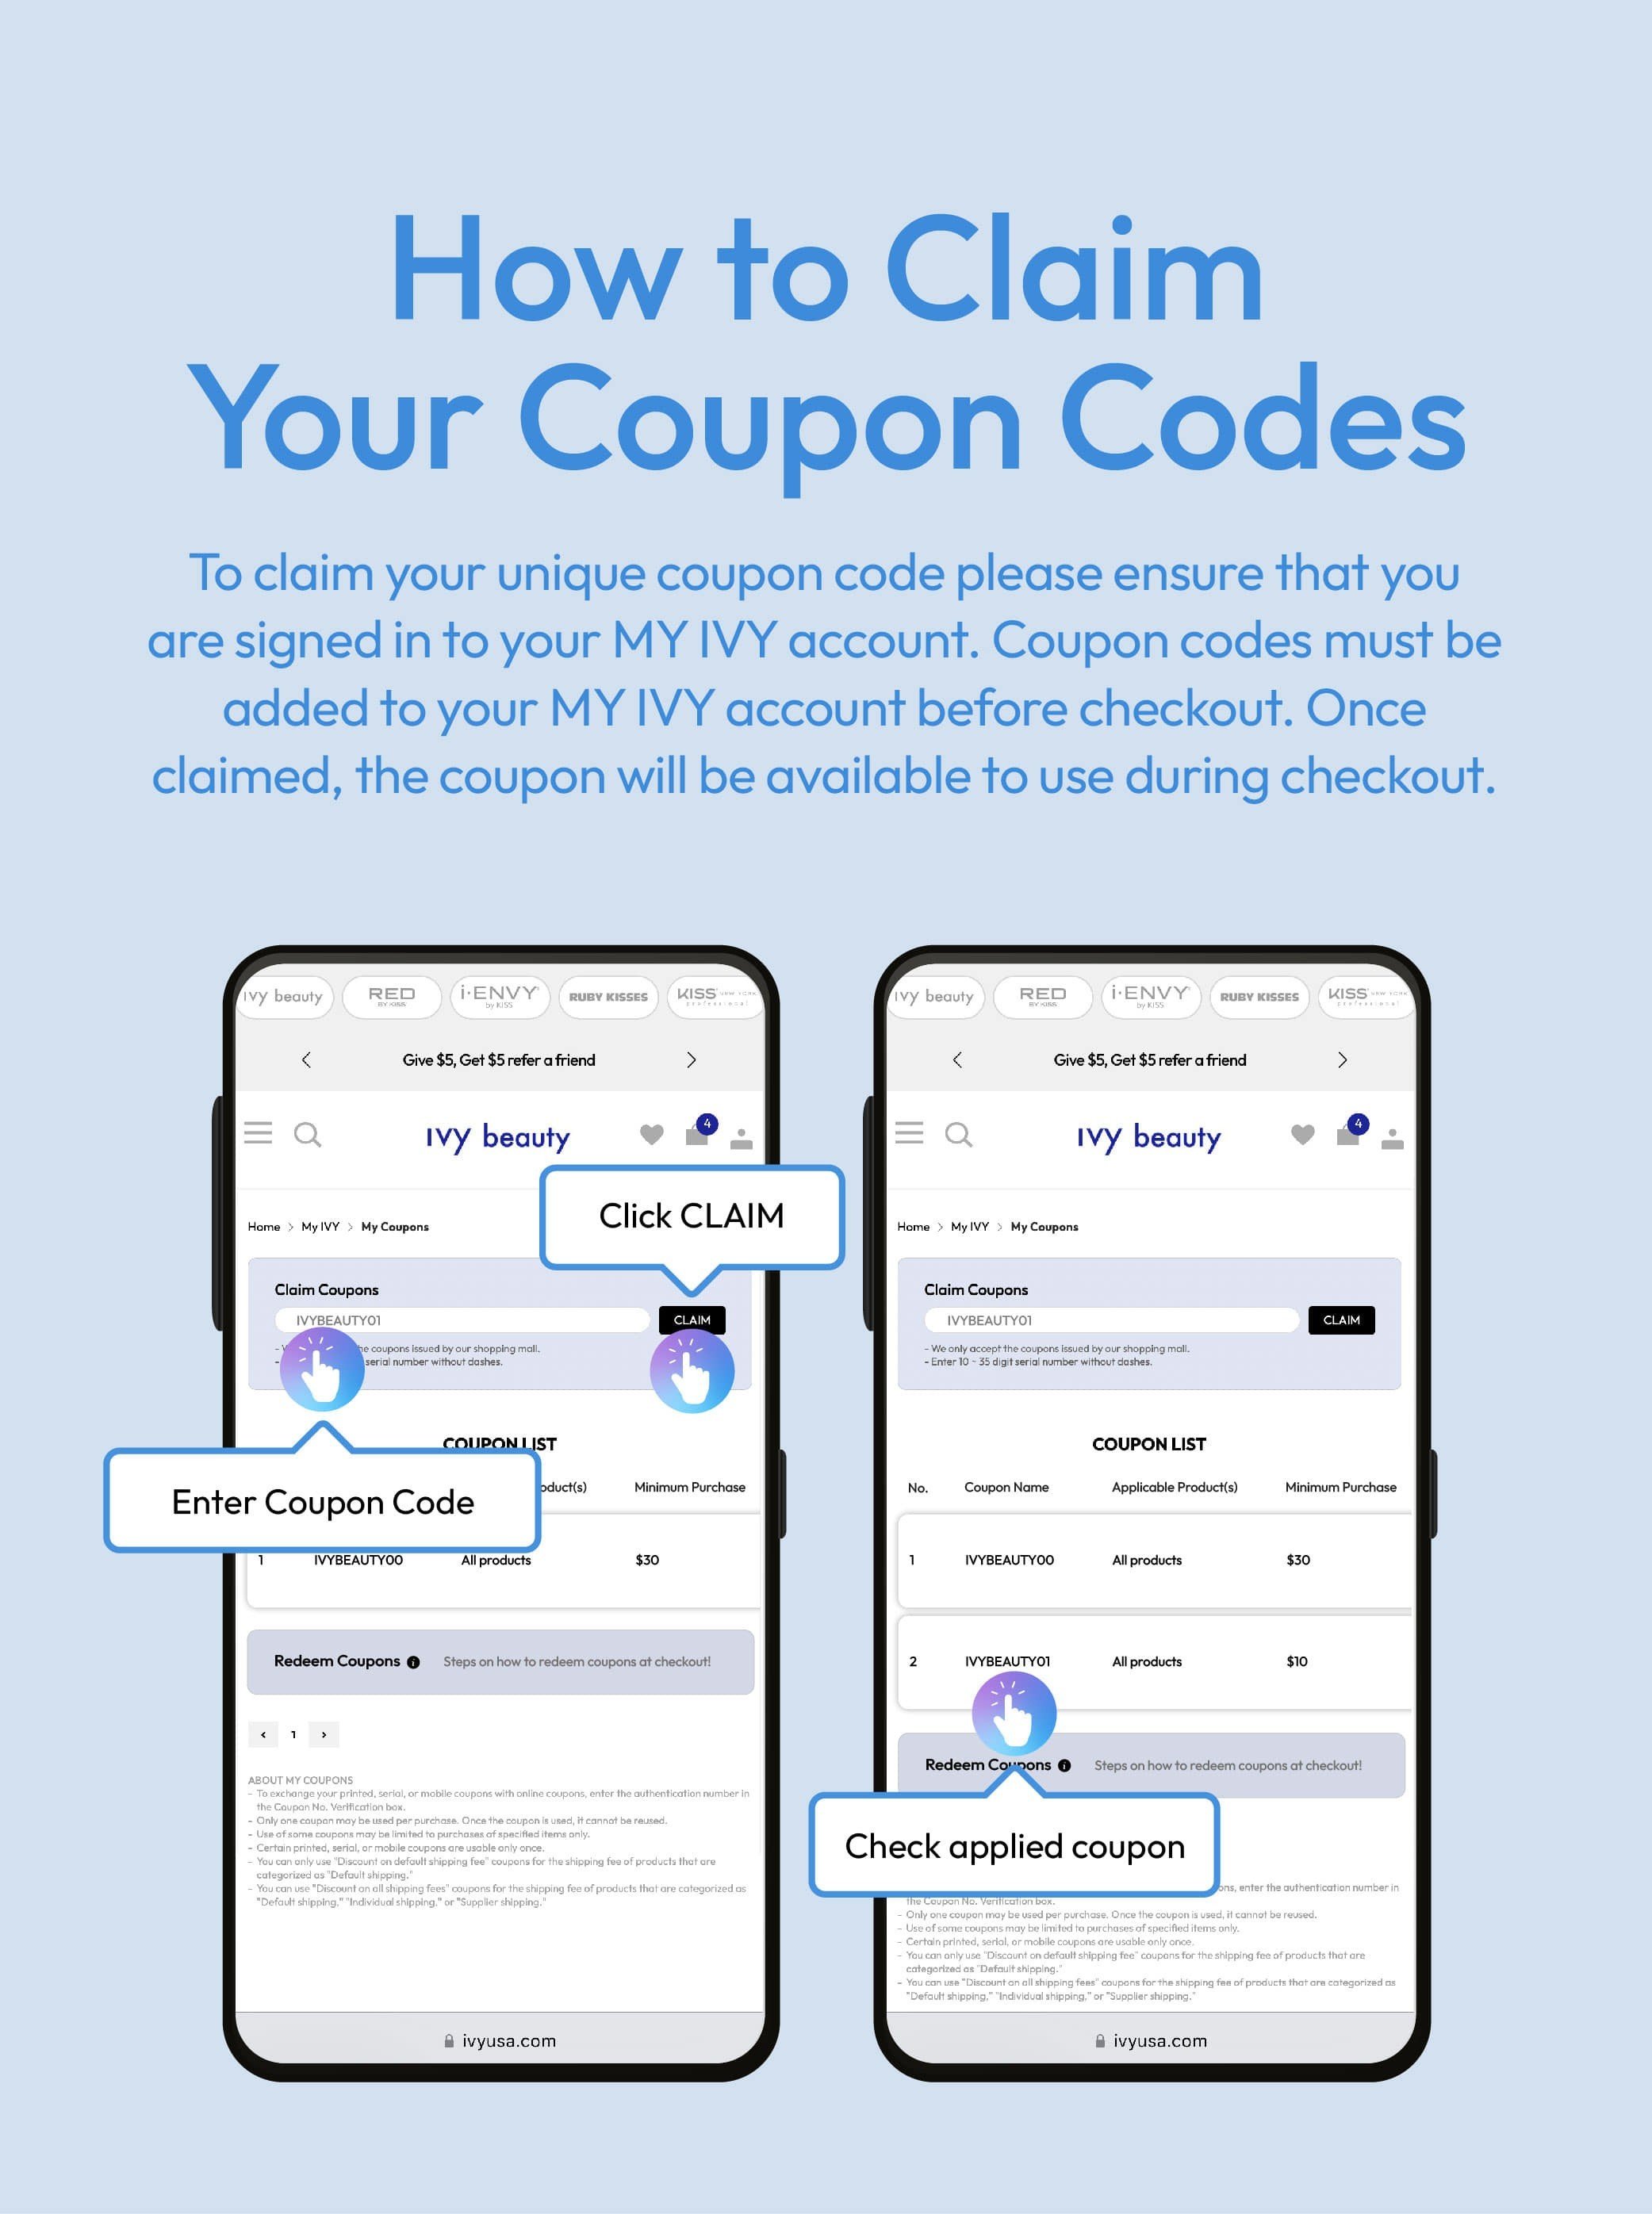 How do I use coupons?